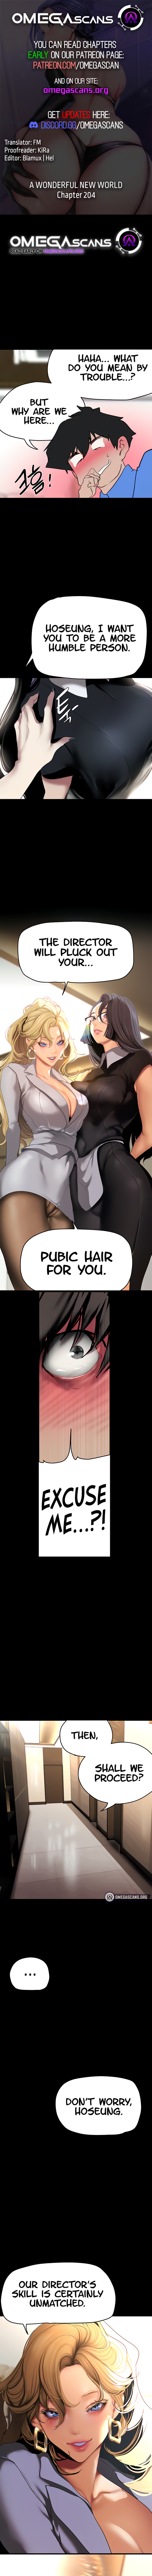 Panel Image 1 for chapter 204 of manhwa A Wonderful New World on read.oppai.stream